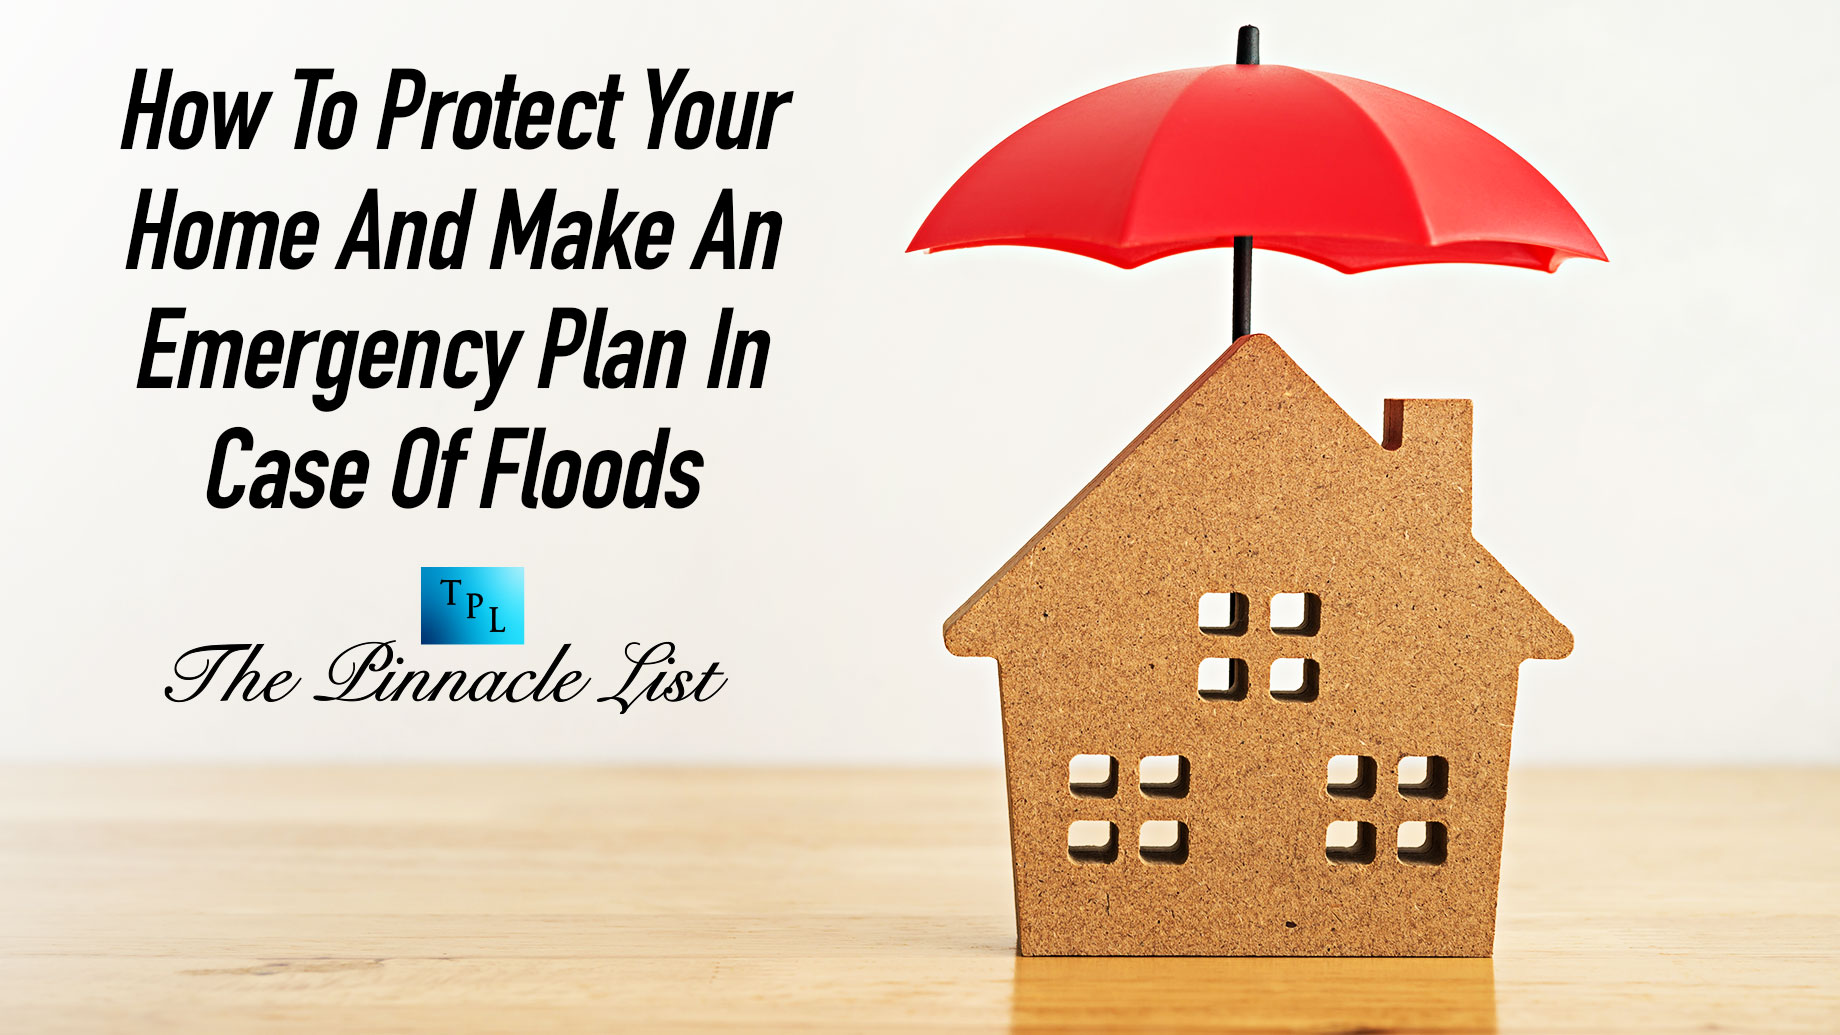 How To Protect Your Home And Make An Emergency Plan In Case Of Floods